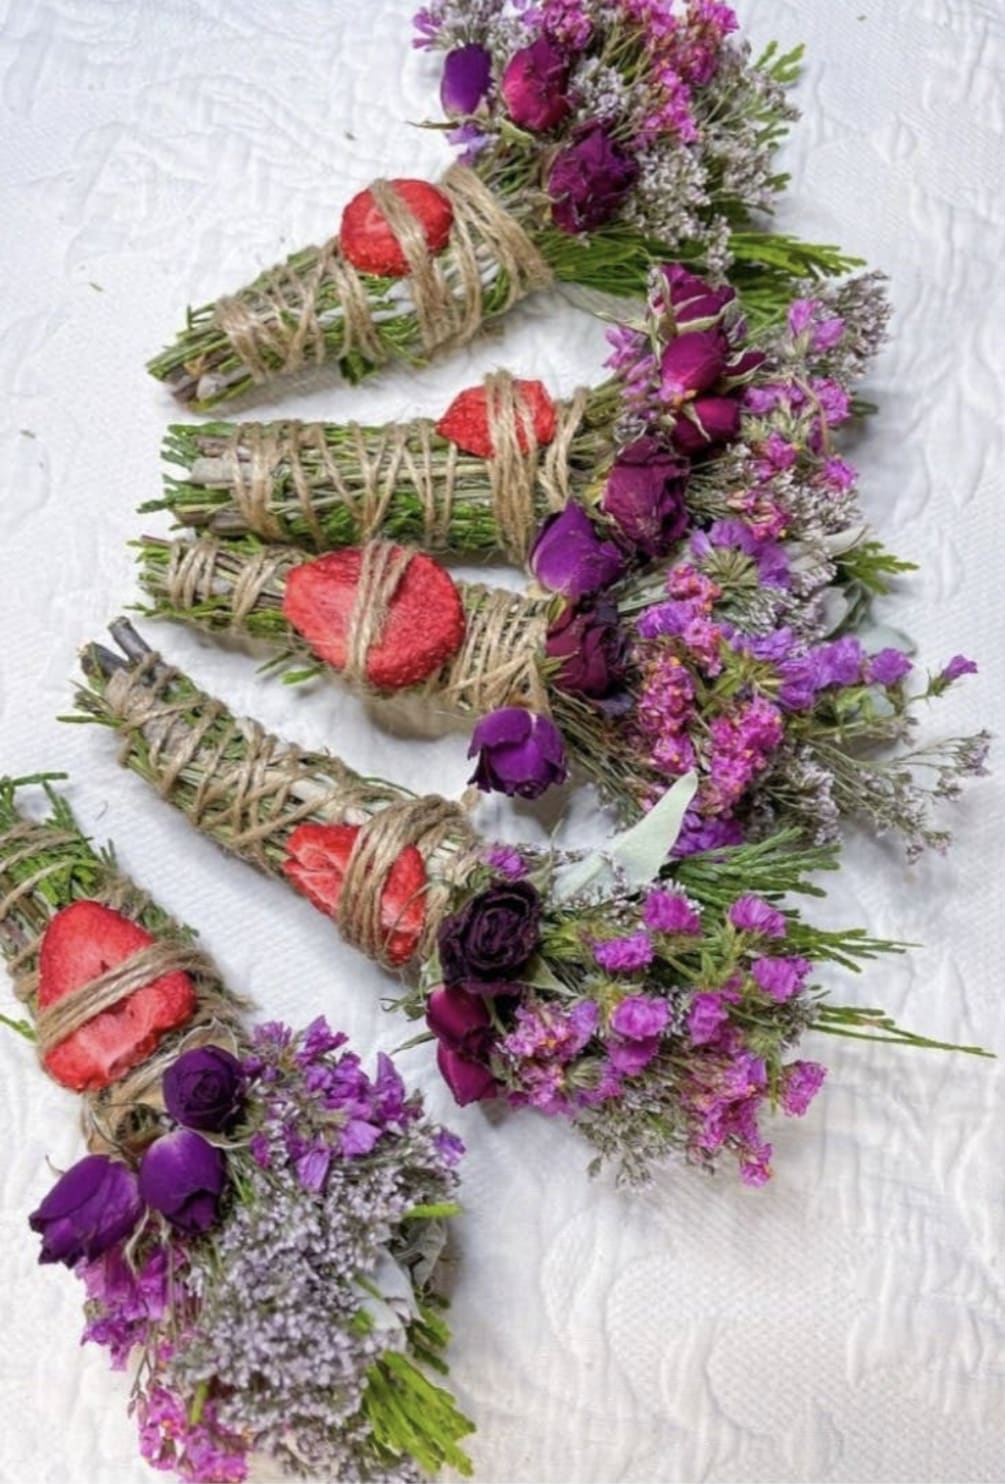 Sage has an earthy natural aroma and is a wonderful tool for